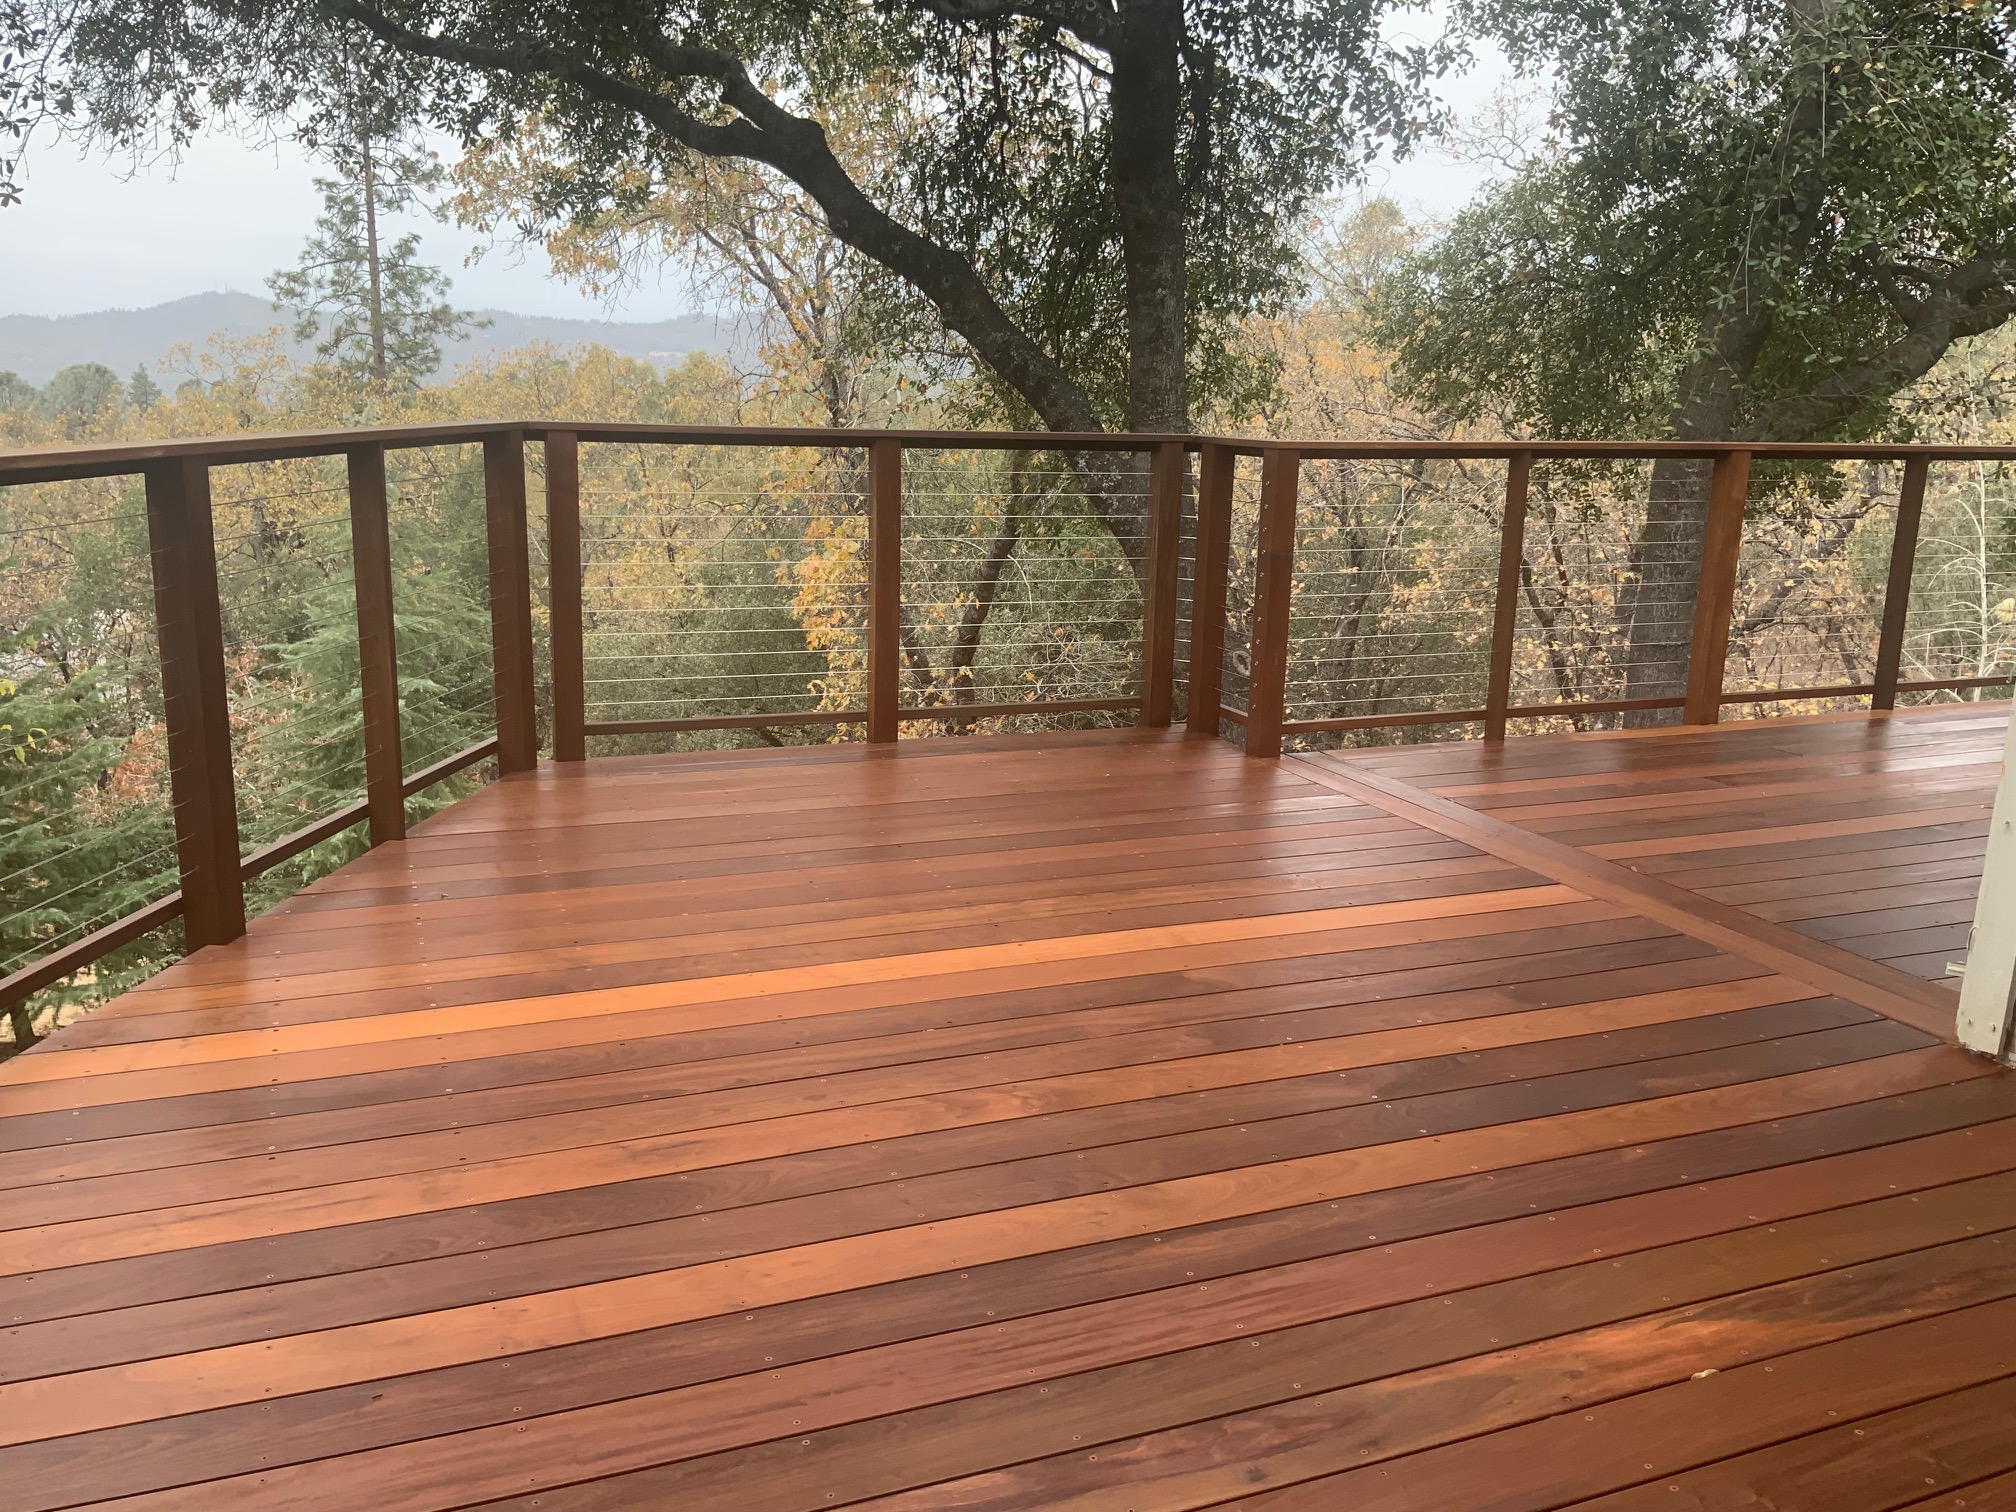 When, And How Often To Treat Outdoor Wood?